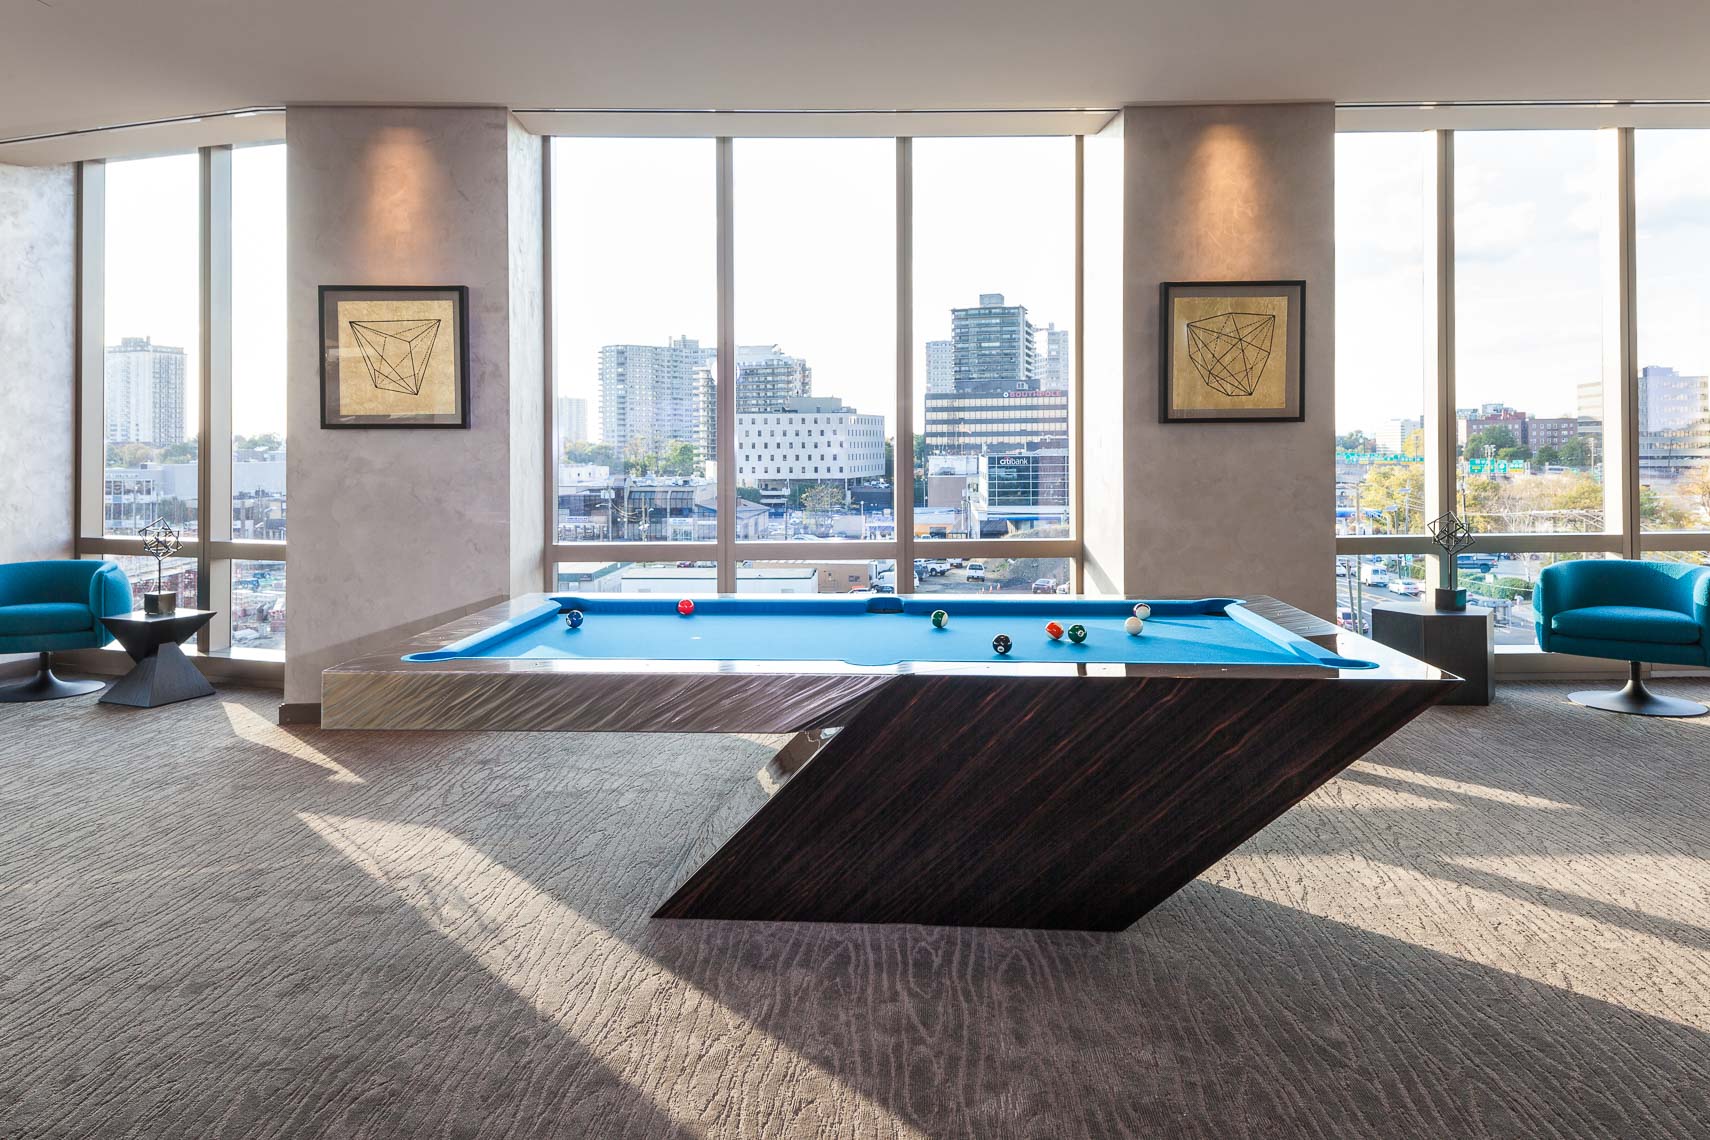 A custom pool table in the common area of a residential luxury apartment building